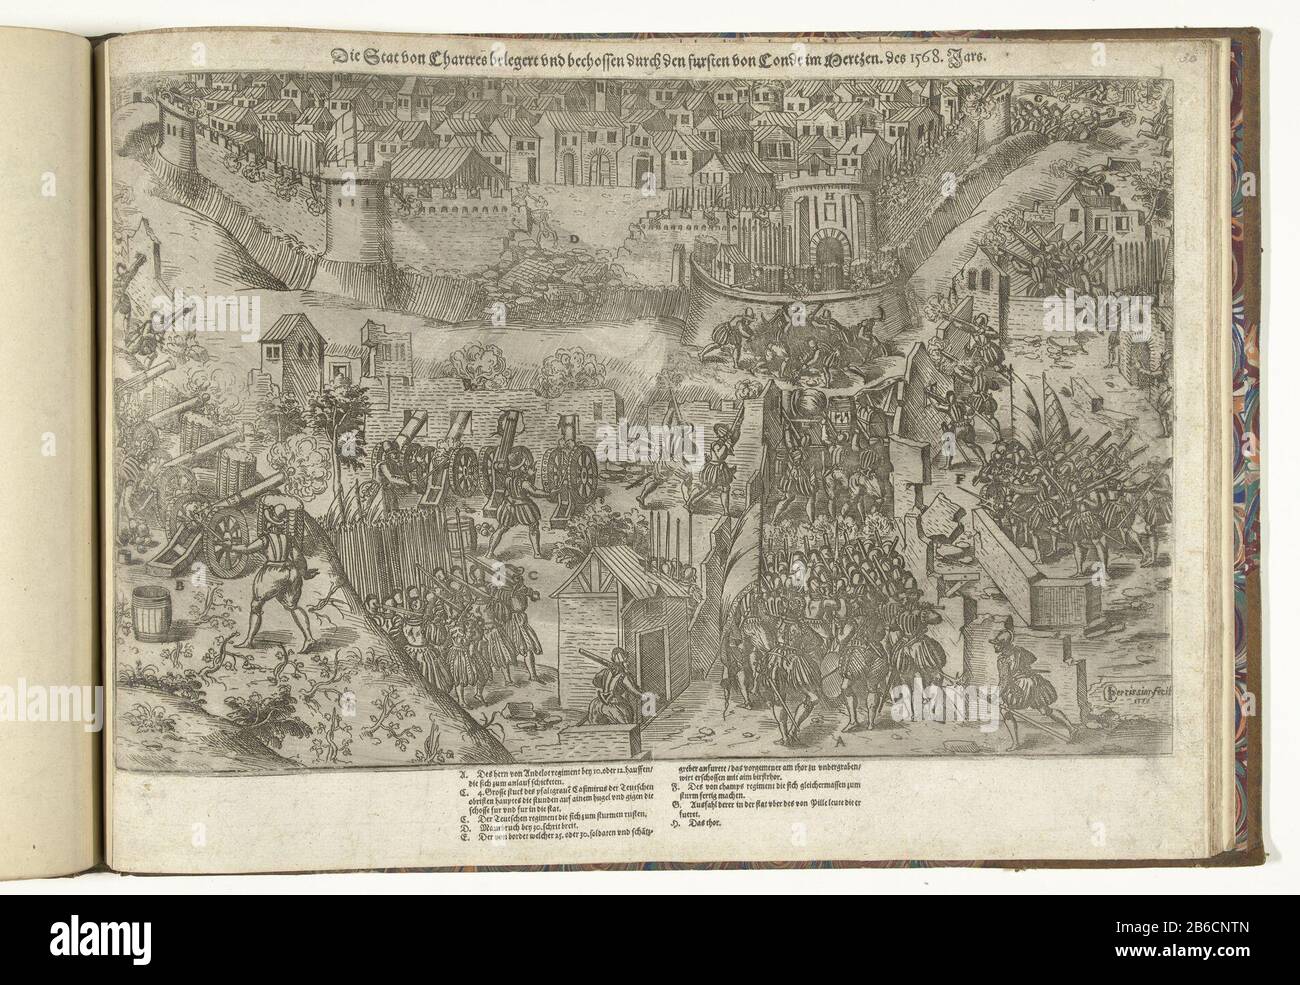 Document en vergelijk van Chartres, 1568 belegert The Stat Chartres and bombarded by the Fursten of Conde in Mertzen of 1568 Jars (op title object) Siege and compare Chartres March 1568. shelling of the walled city. In the legend the legend A-H in German. Ongenummerd. Manufacturer : printmaker Jean Perrissin (listed property) Place manufacture: France Date: 1570 Physical features: etching with texts in letterpress material: paper Technique: etching / printing sizes: sheet: H 376 mm × W 505 mm Subject: siege war of French religious war when: 1568 -03 - 1568-03 Stock Photo